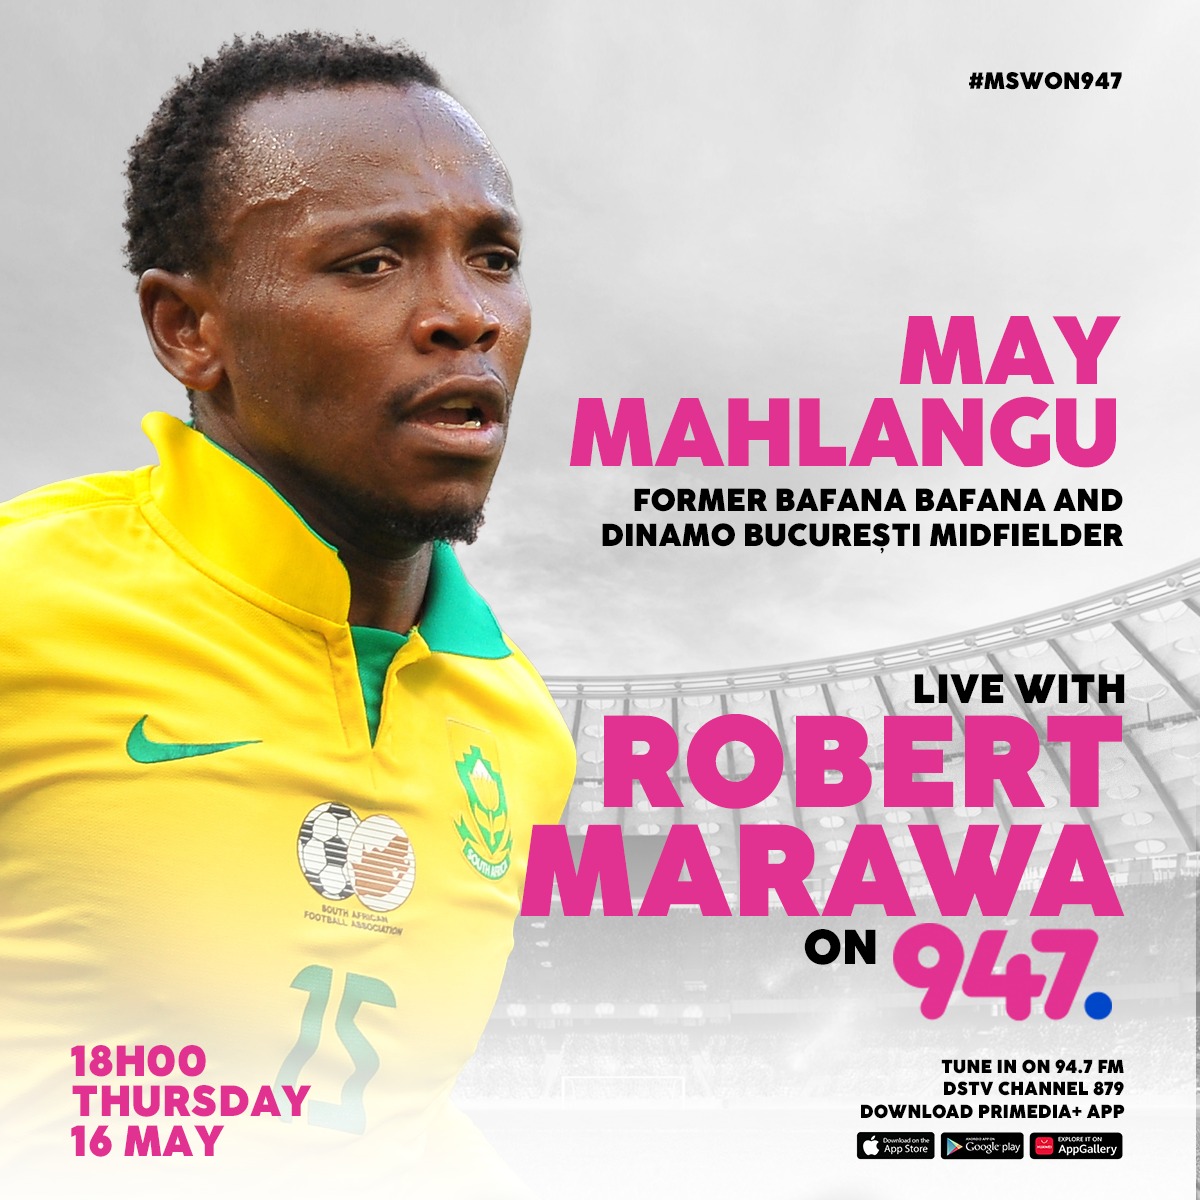 One of our finest exports!! A player that's left us with many questions to ask and TONIGHT we get that chance to do that on #MSWOn947 @947 @RISEfm943 @VumaFM @SowetanLIVE